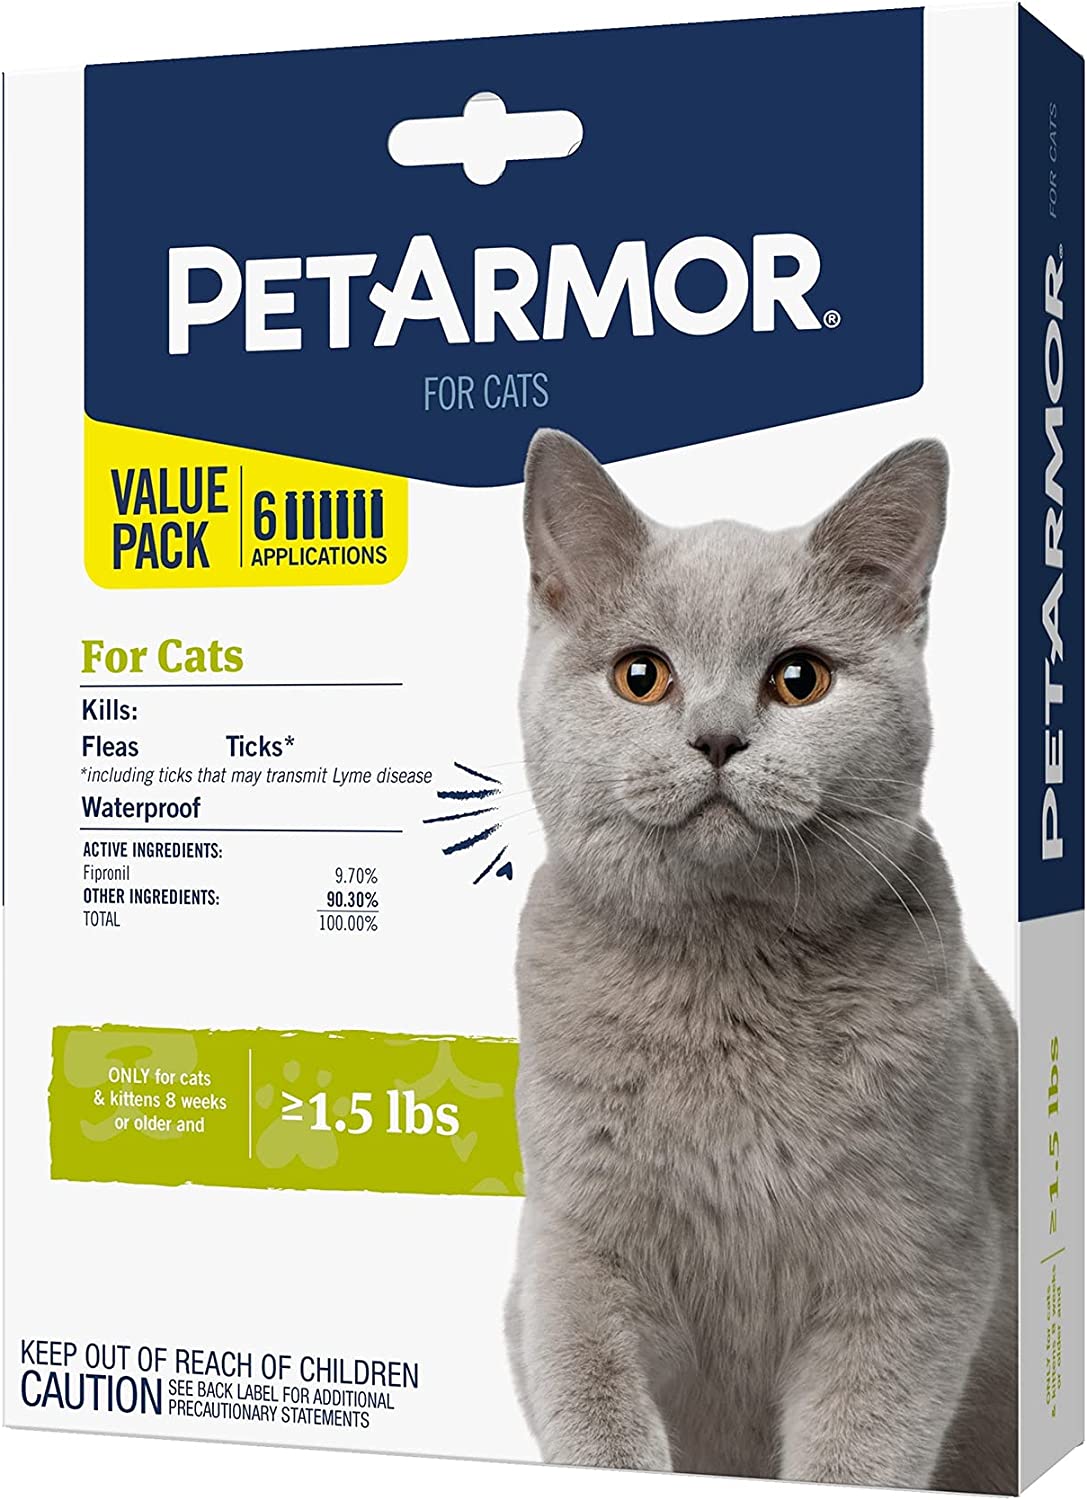 PetArmor Flea and Tick Treatment for Cats Topical 6 Monthly Treatments 6 CT параллель импортные товары 